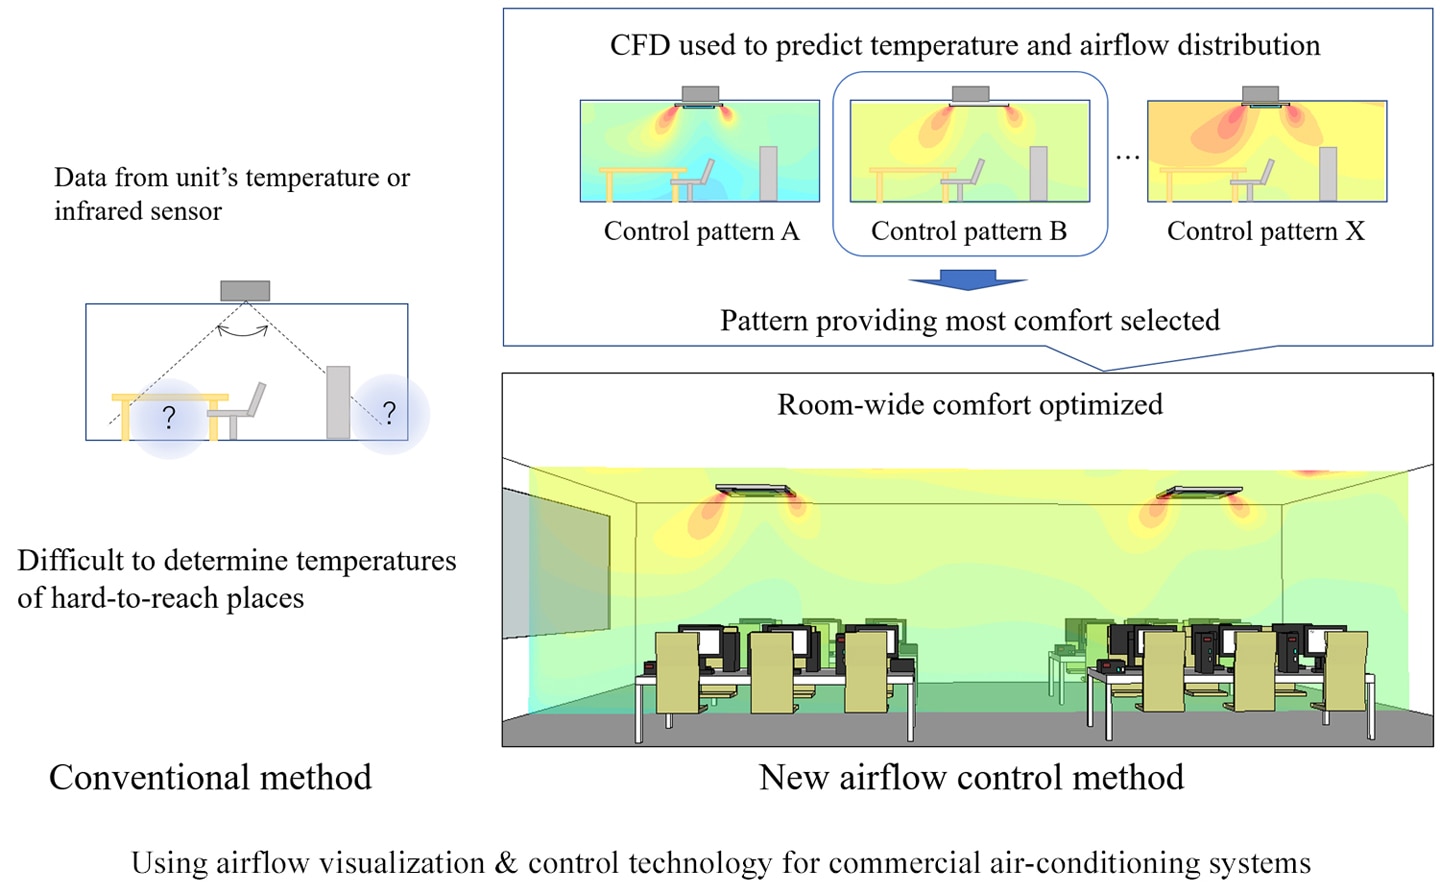 Using airflow visualization & control technology for commercial air-conditioning